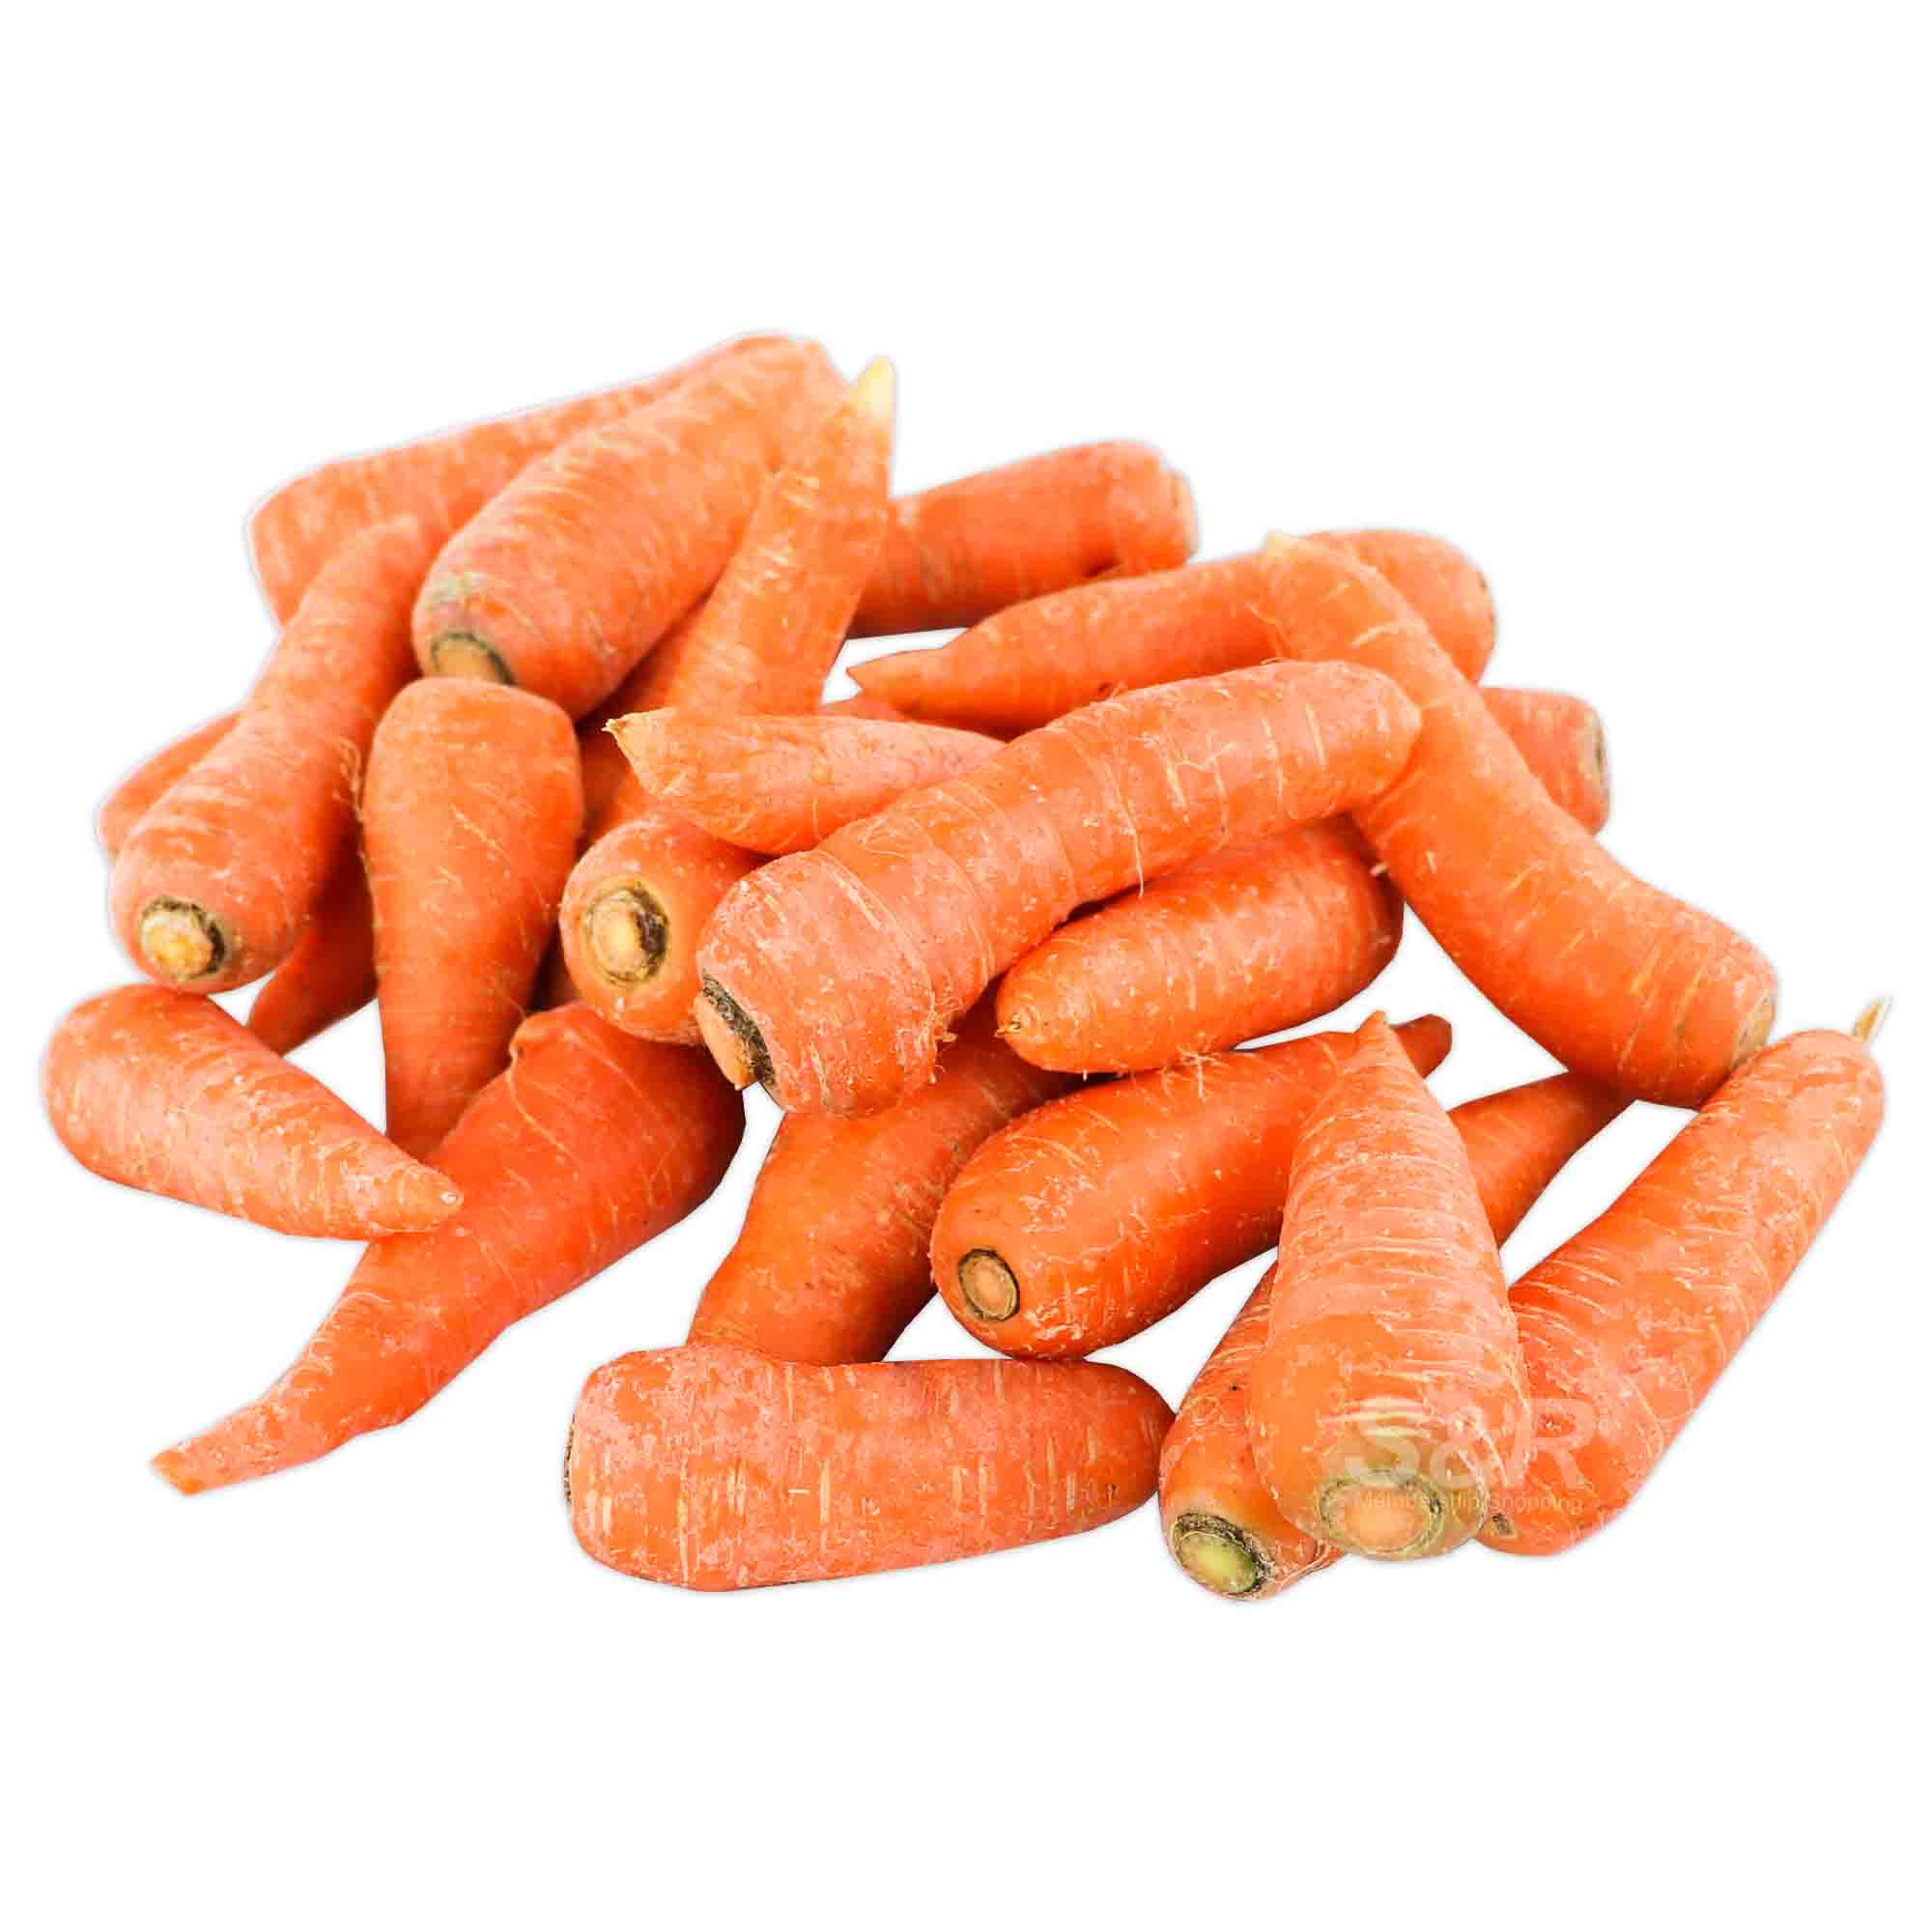 S&R Local Baby Carrots approx. 1.1Kg